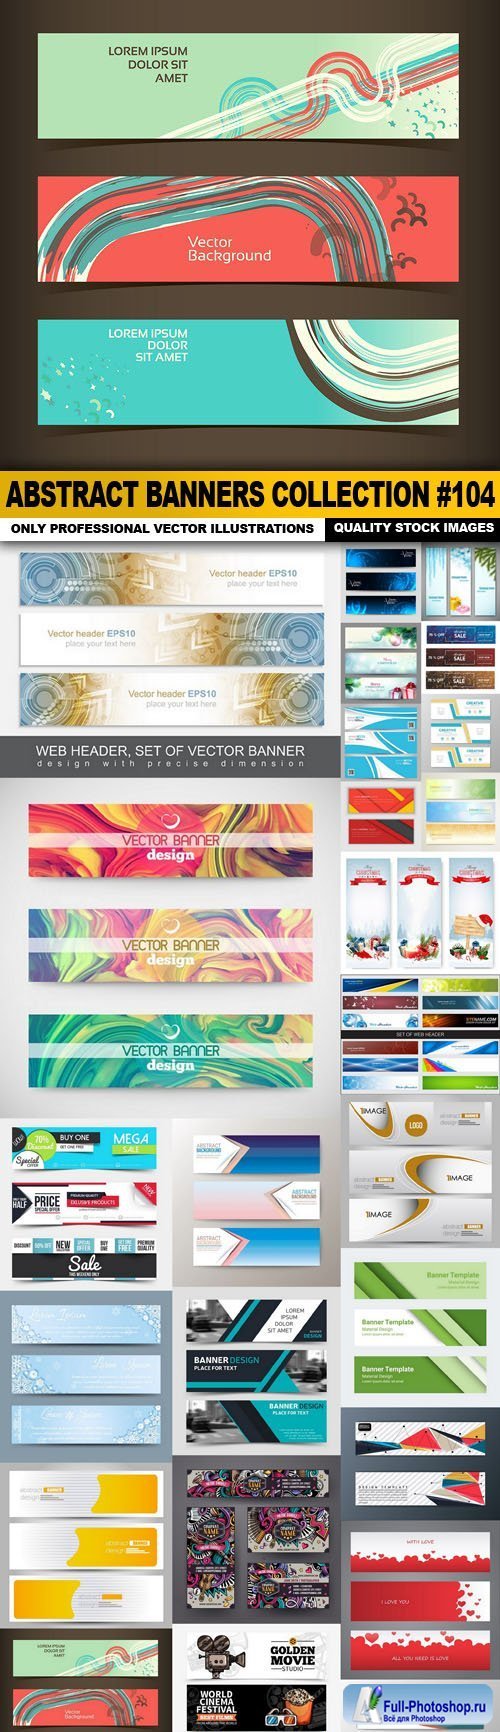 Abstract Banners Collection #104 - 25 Vectors